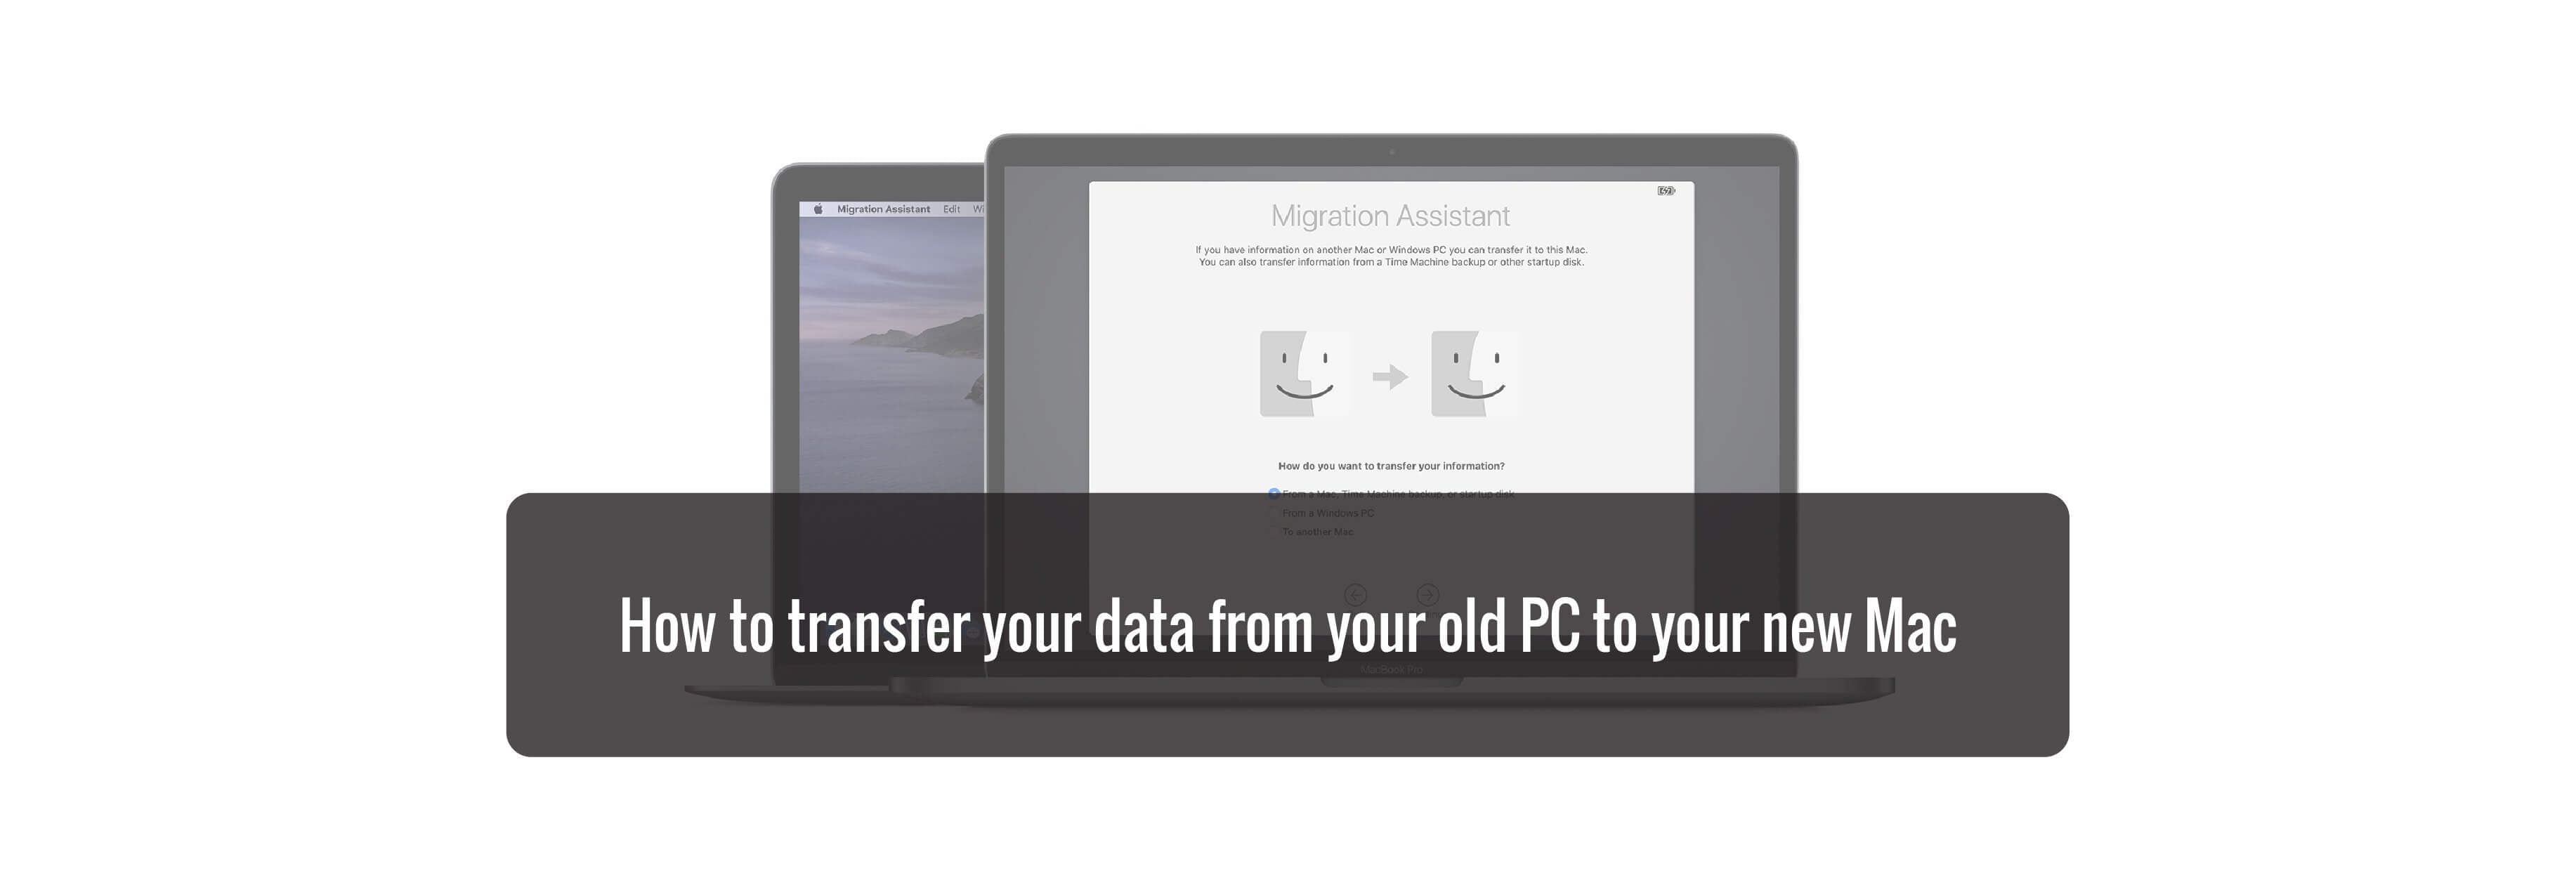 How to transfer your data from your old PC to your new Mac